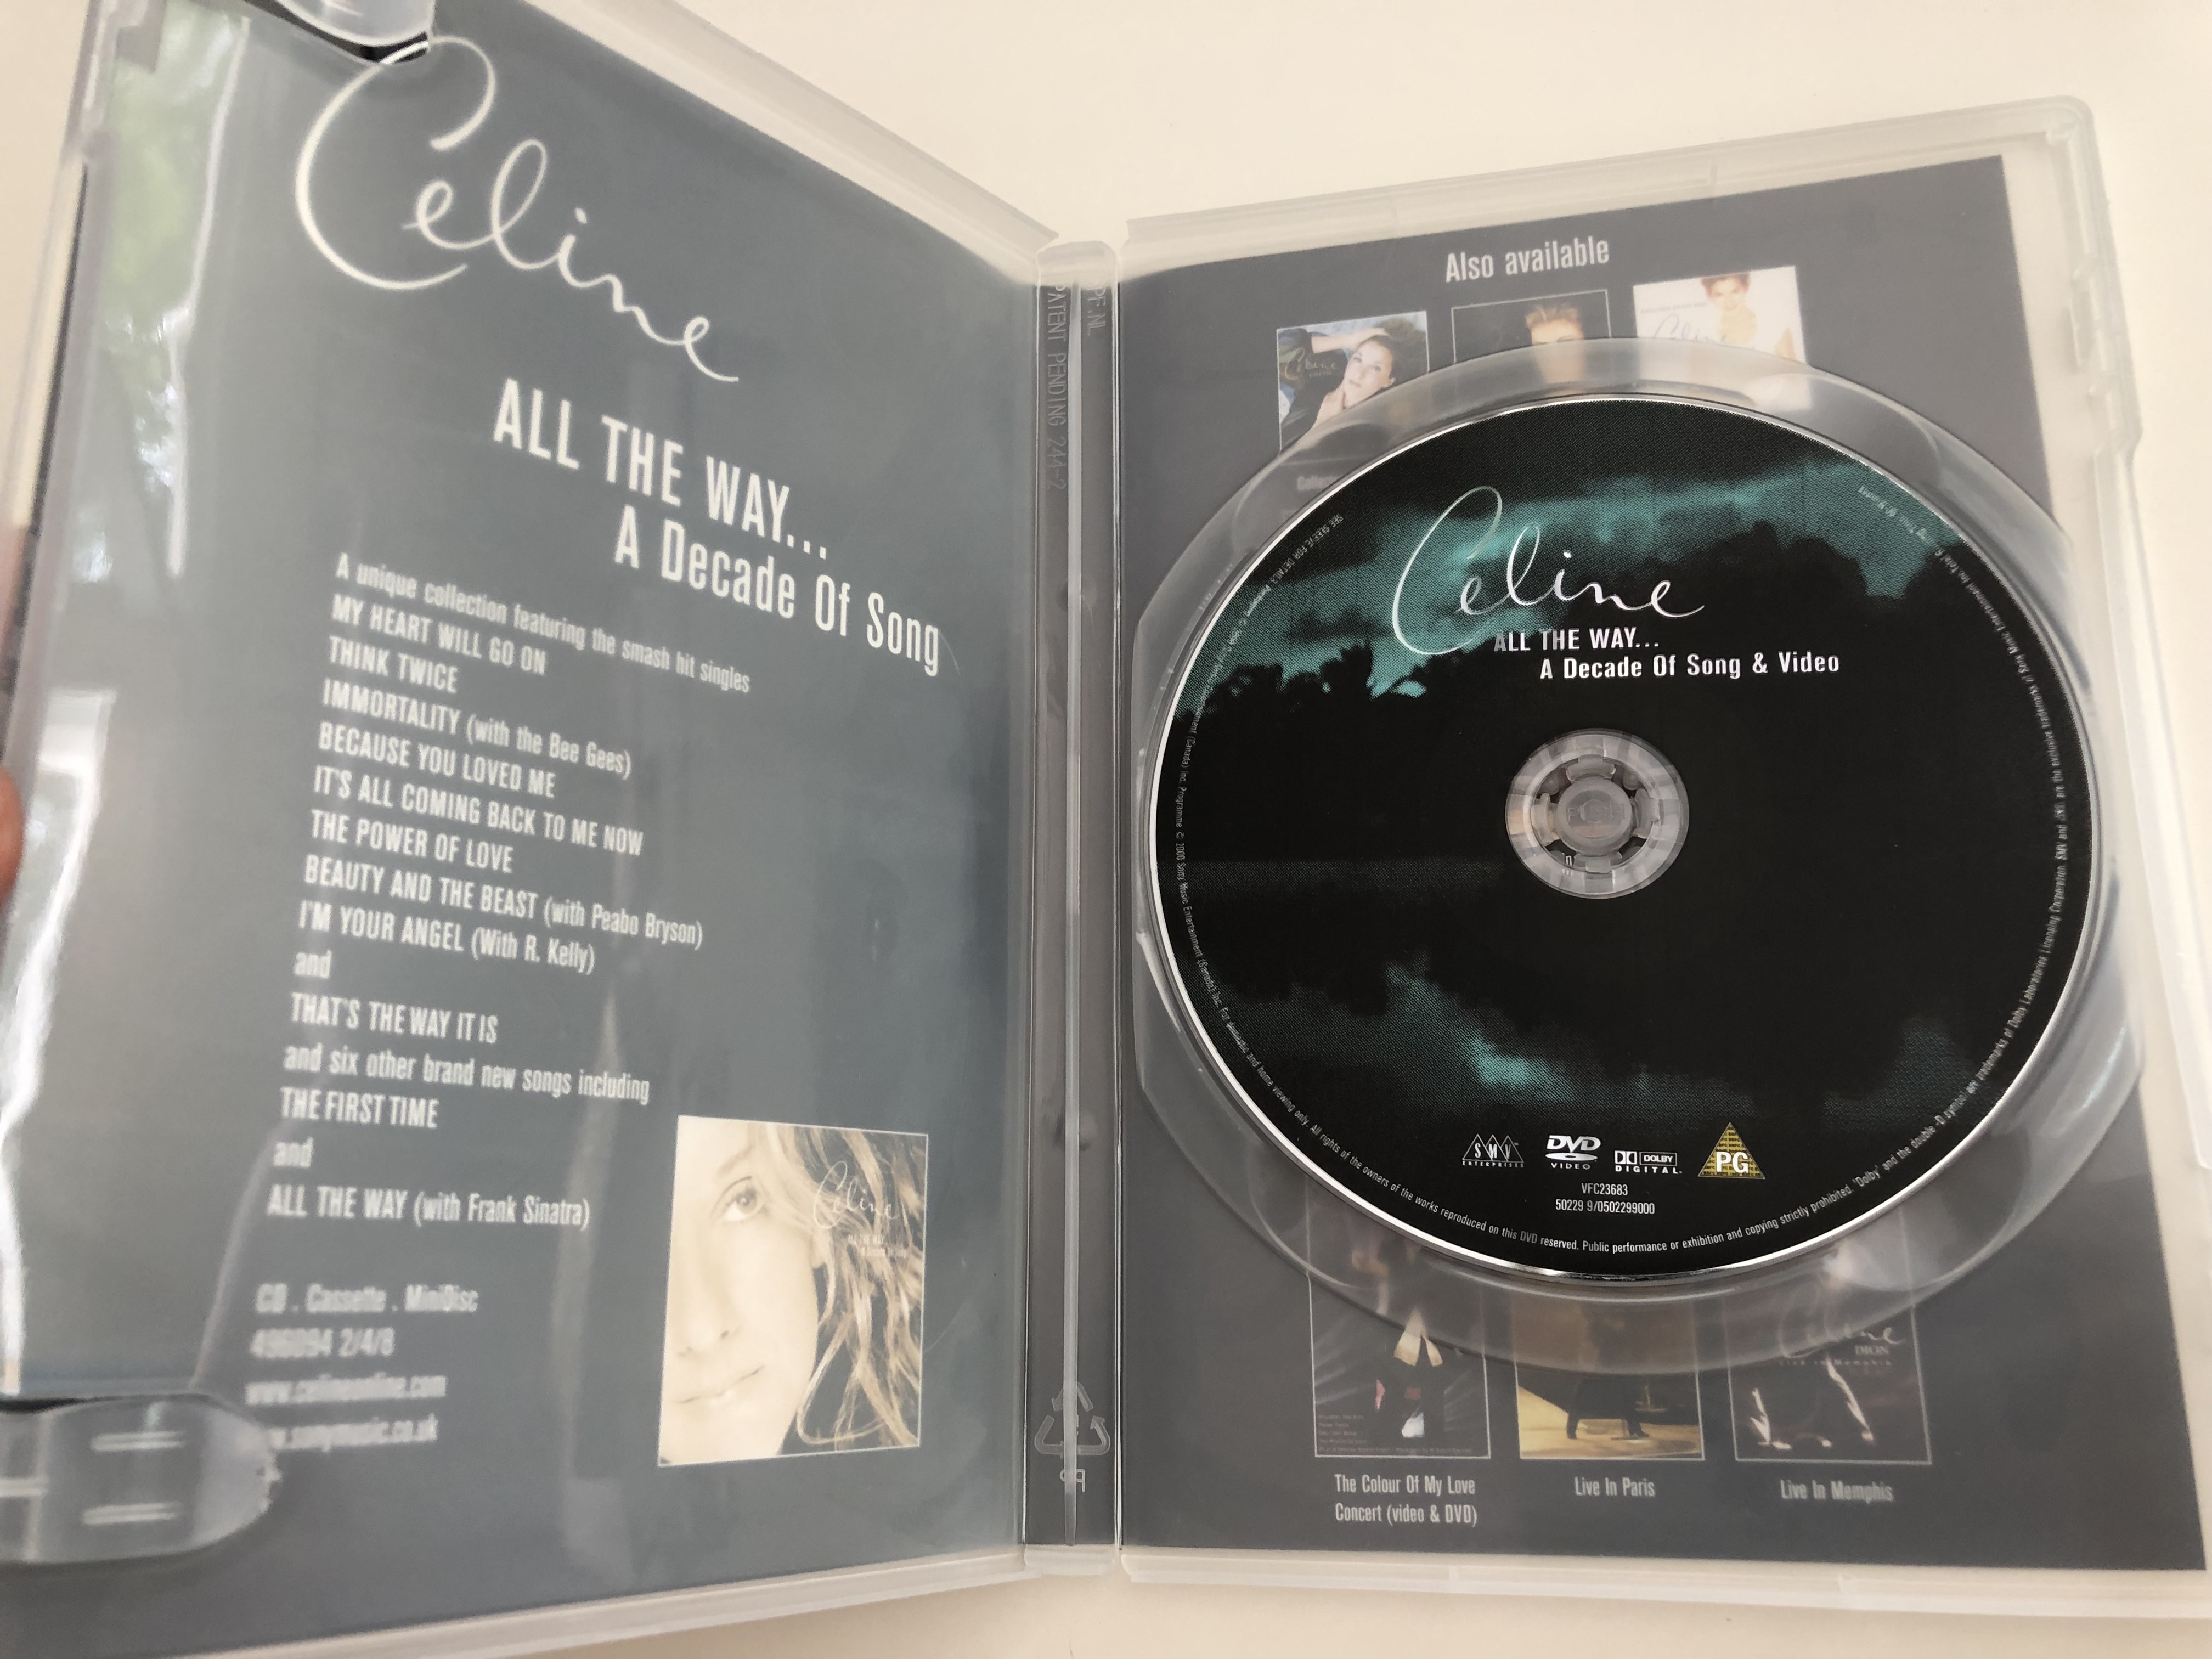 Celine Dion - All the Way DVD 2000 / A Decade of Song & Video / Sony Music  50229 9 - bibleinmylanguage